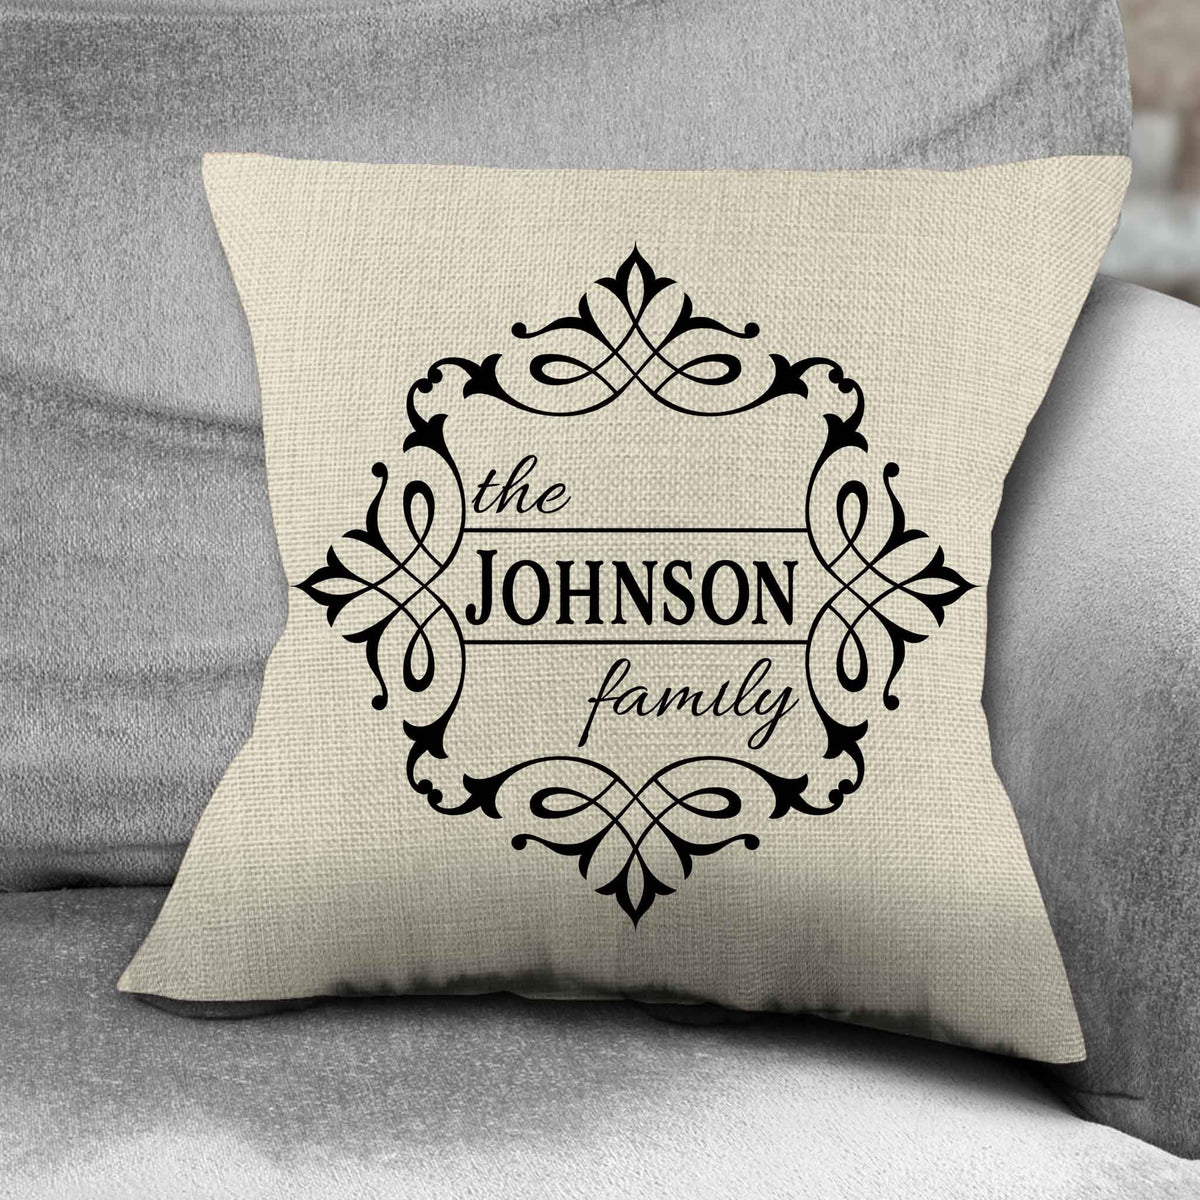 Personalized Throw Pillow | Custom Decorative Pillow | The Family